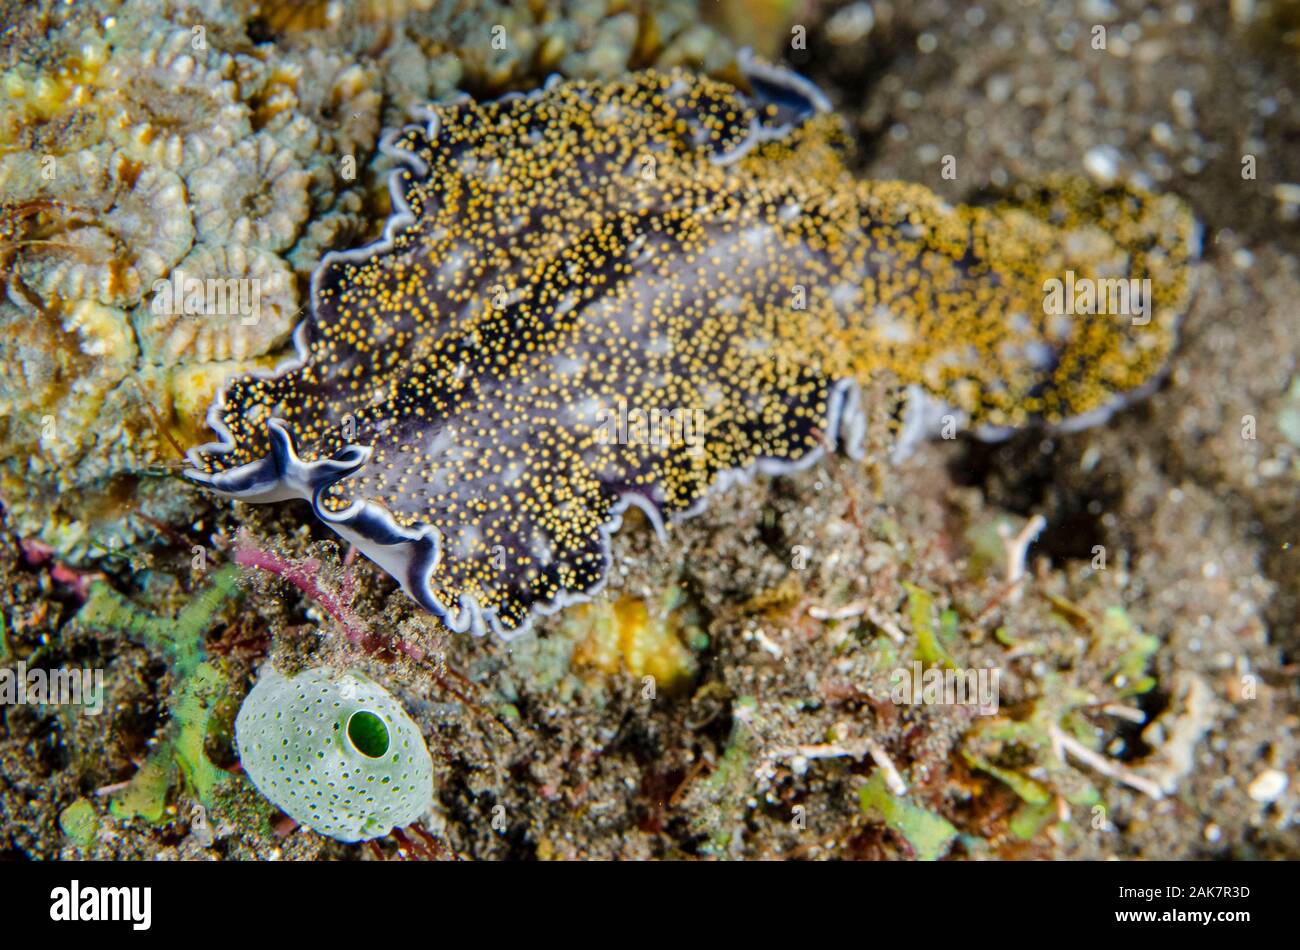 Spangled Flatworm, Acanthozoon sp, Pseudocerotidae Family, night dive, Pyramids dive site, Amed, Bali, Indonesia, Indian Ocean Stock Photo